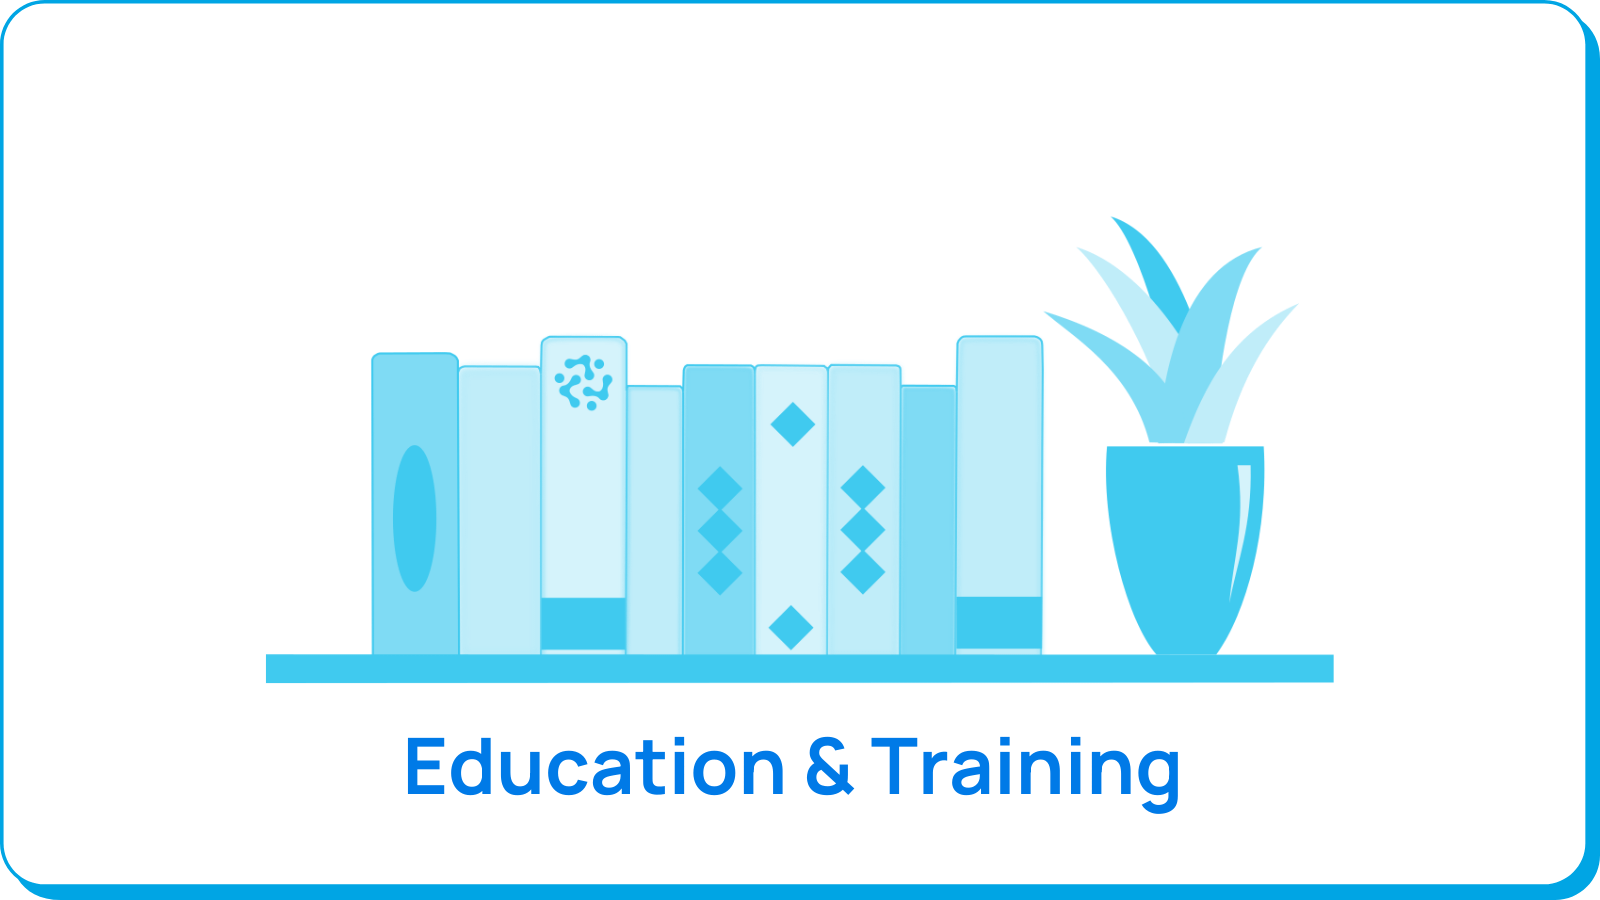 Organisational Design for Education and Training organisations.